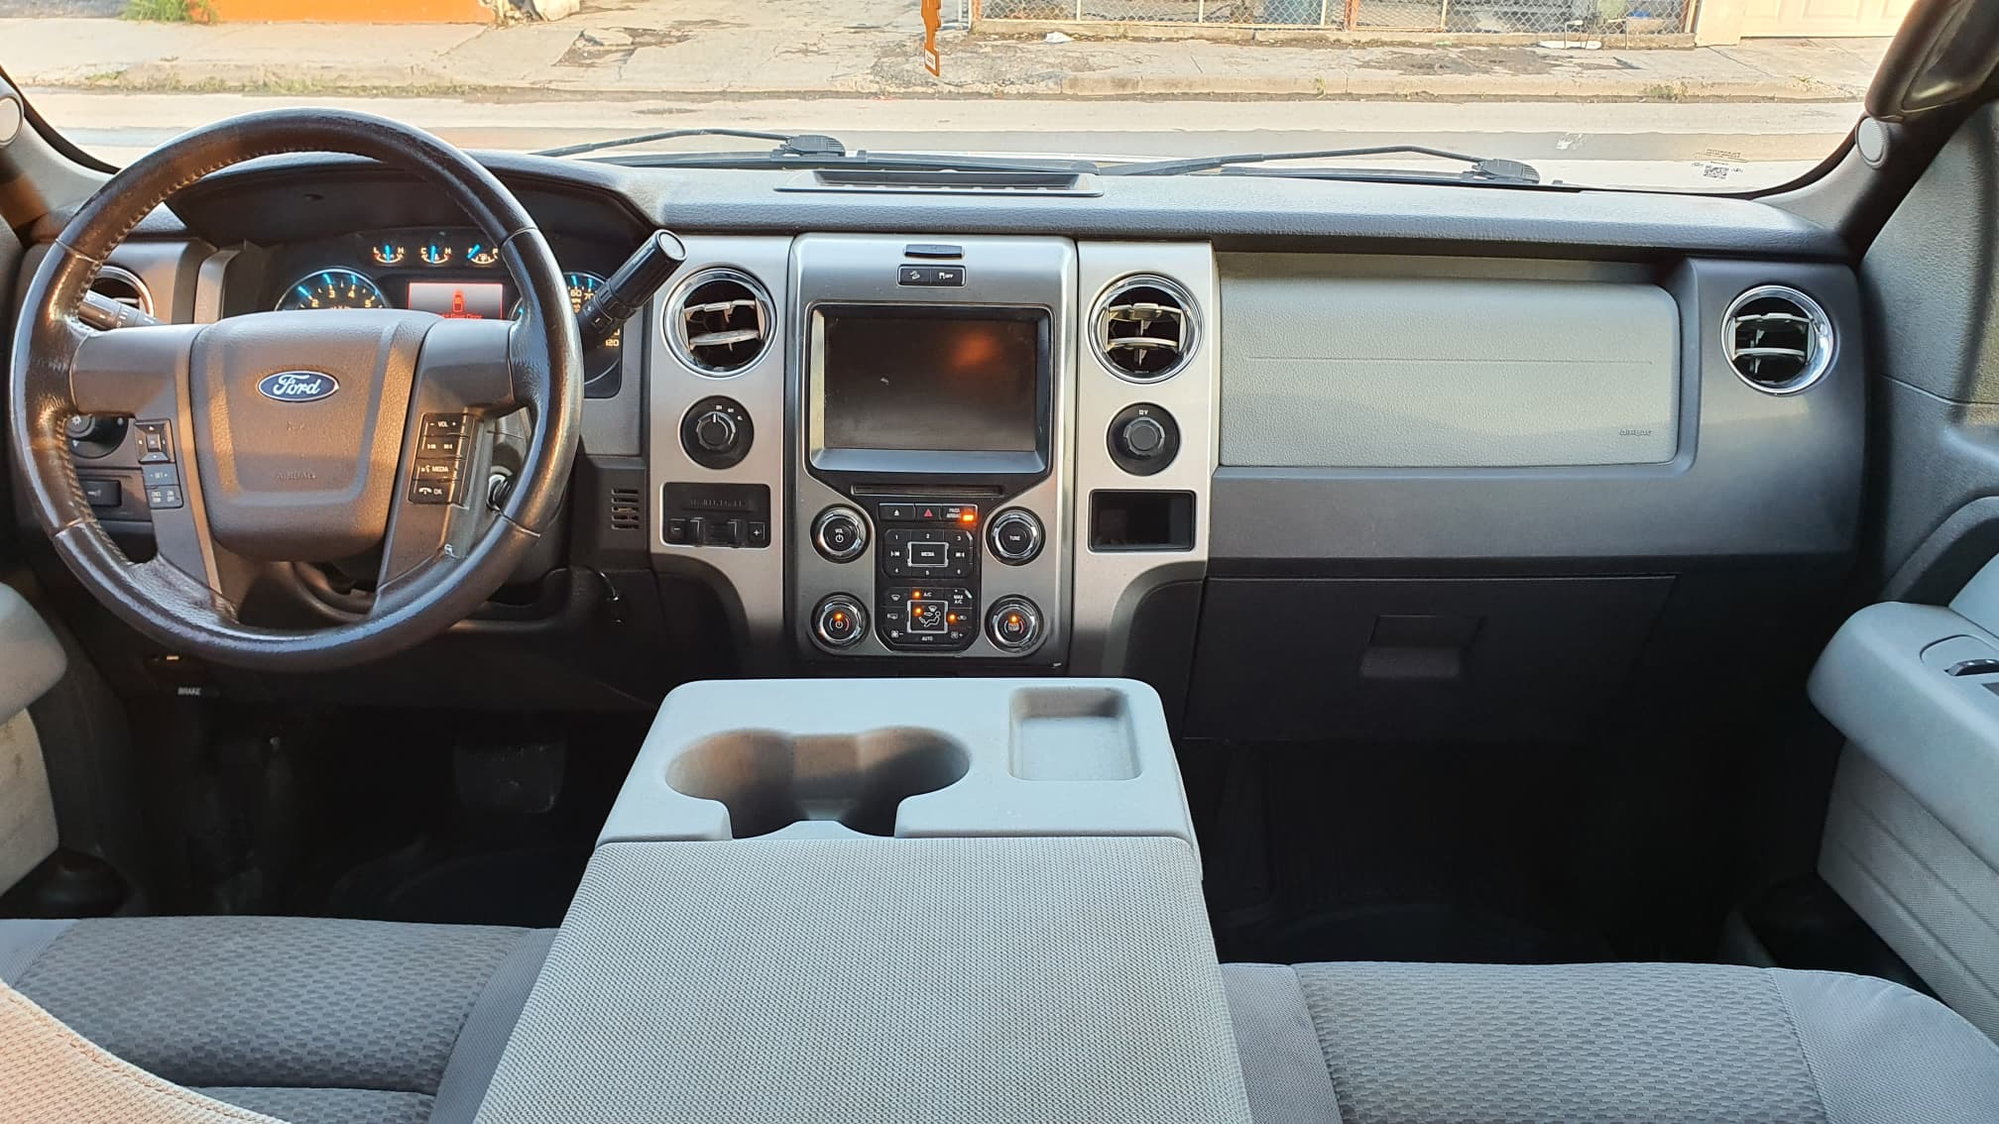 2019 ford f150 stereo upgrade